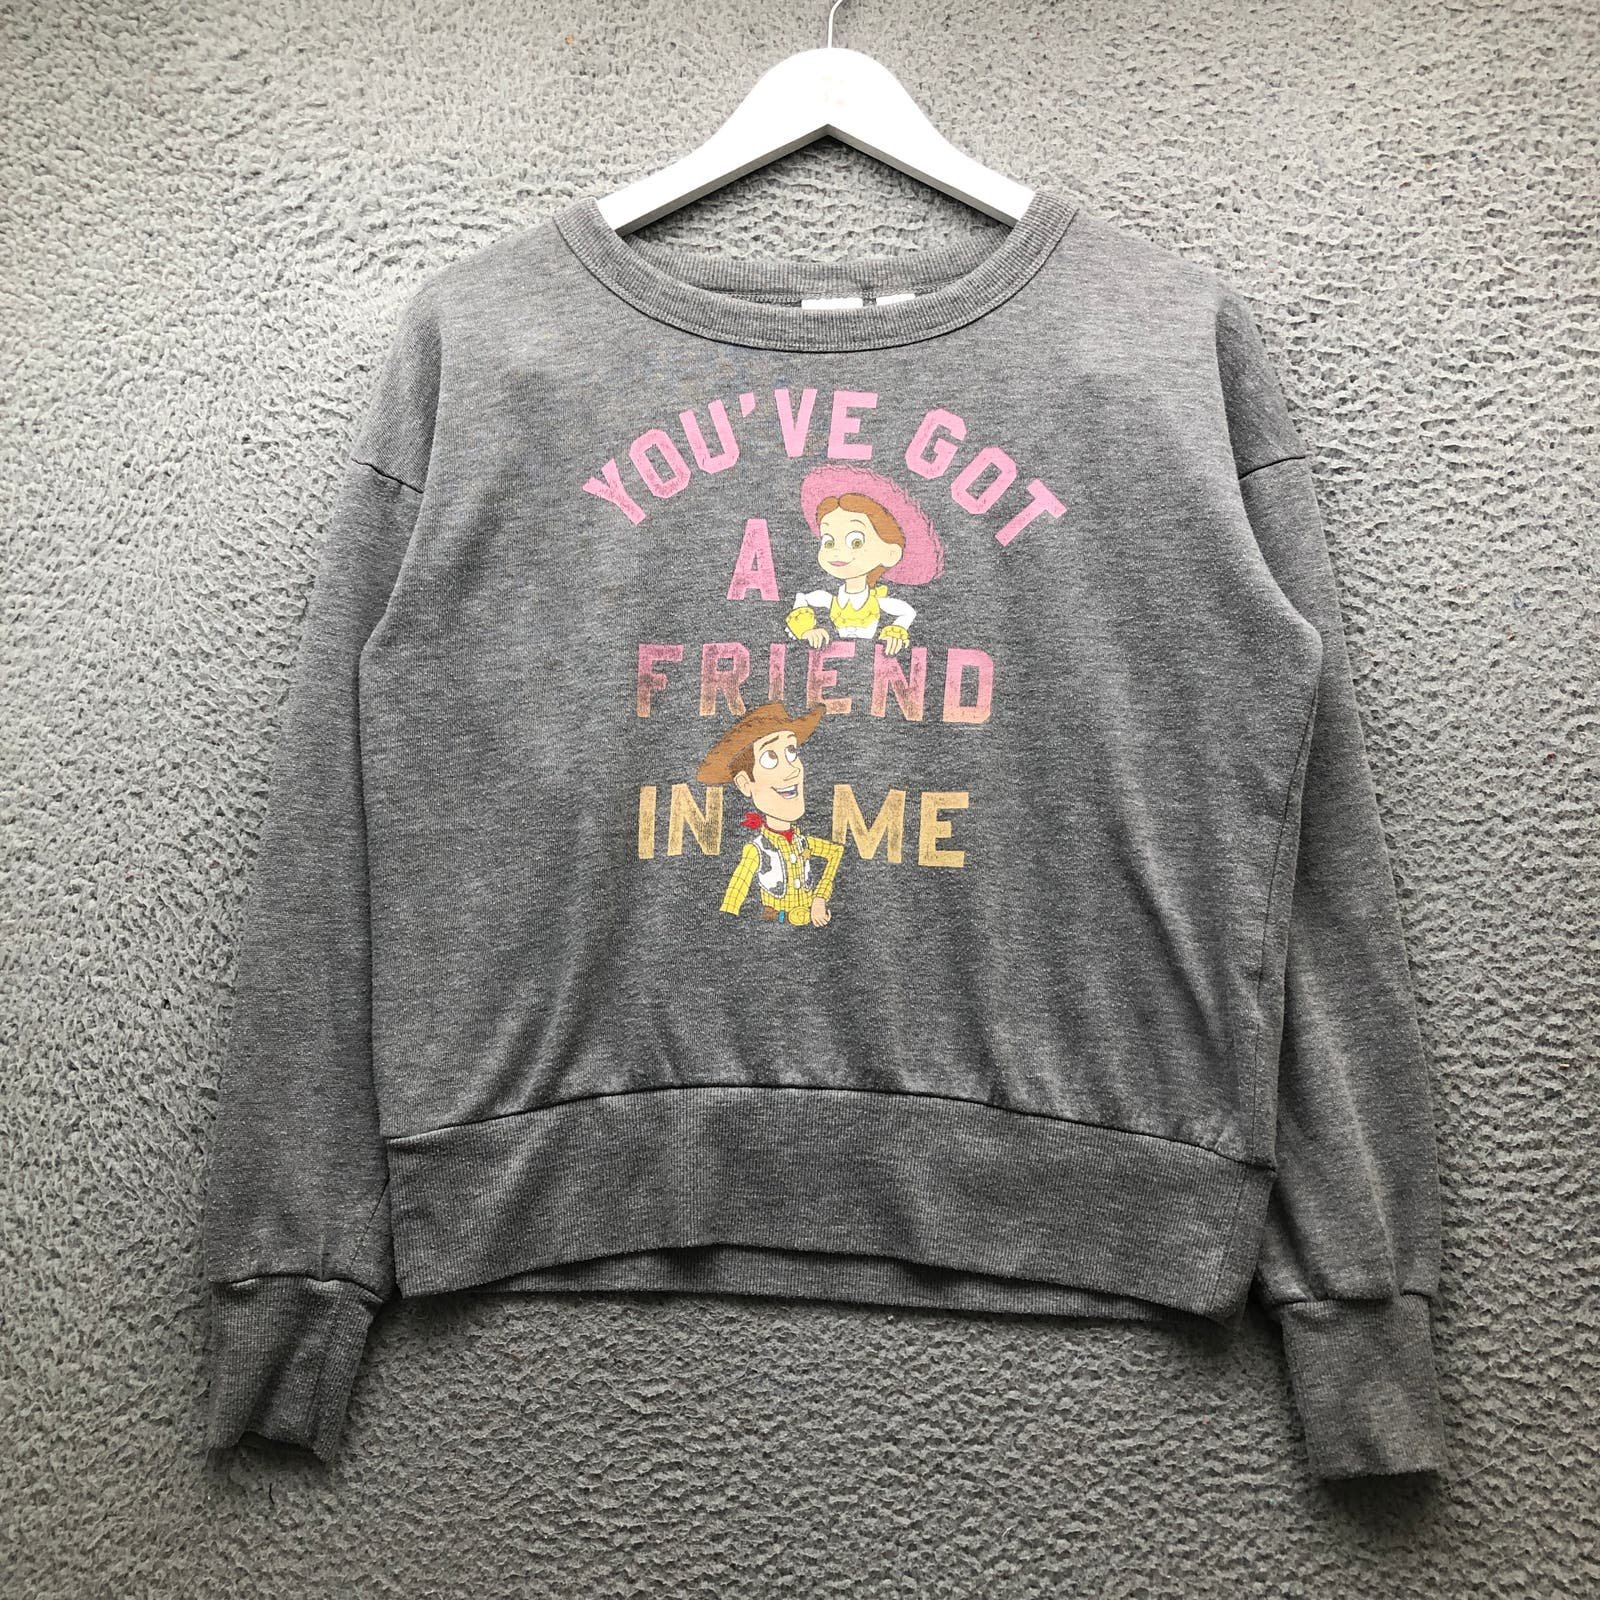 Classic Disney Pixar Toy Story Sweatshirt Womens S Long Sleeve You´ve Got A Friend In Me HqE1Ymi2Y Counter Genuine 